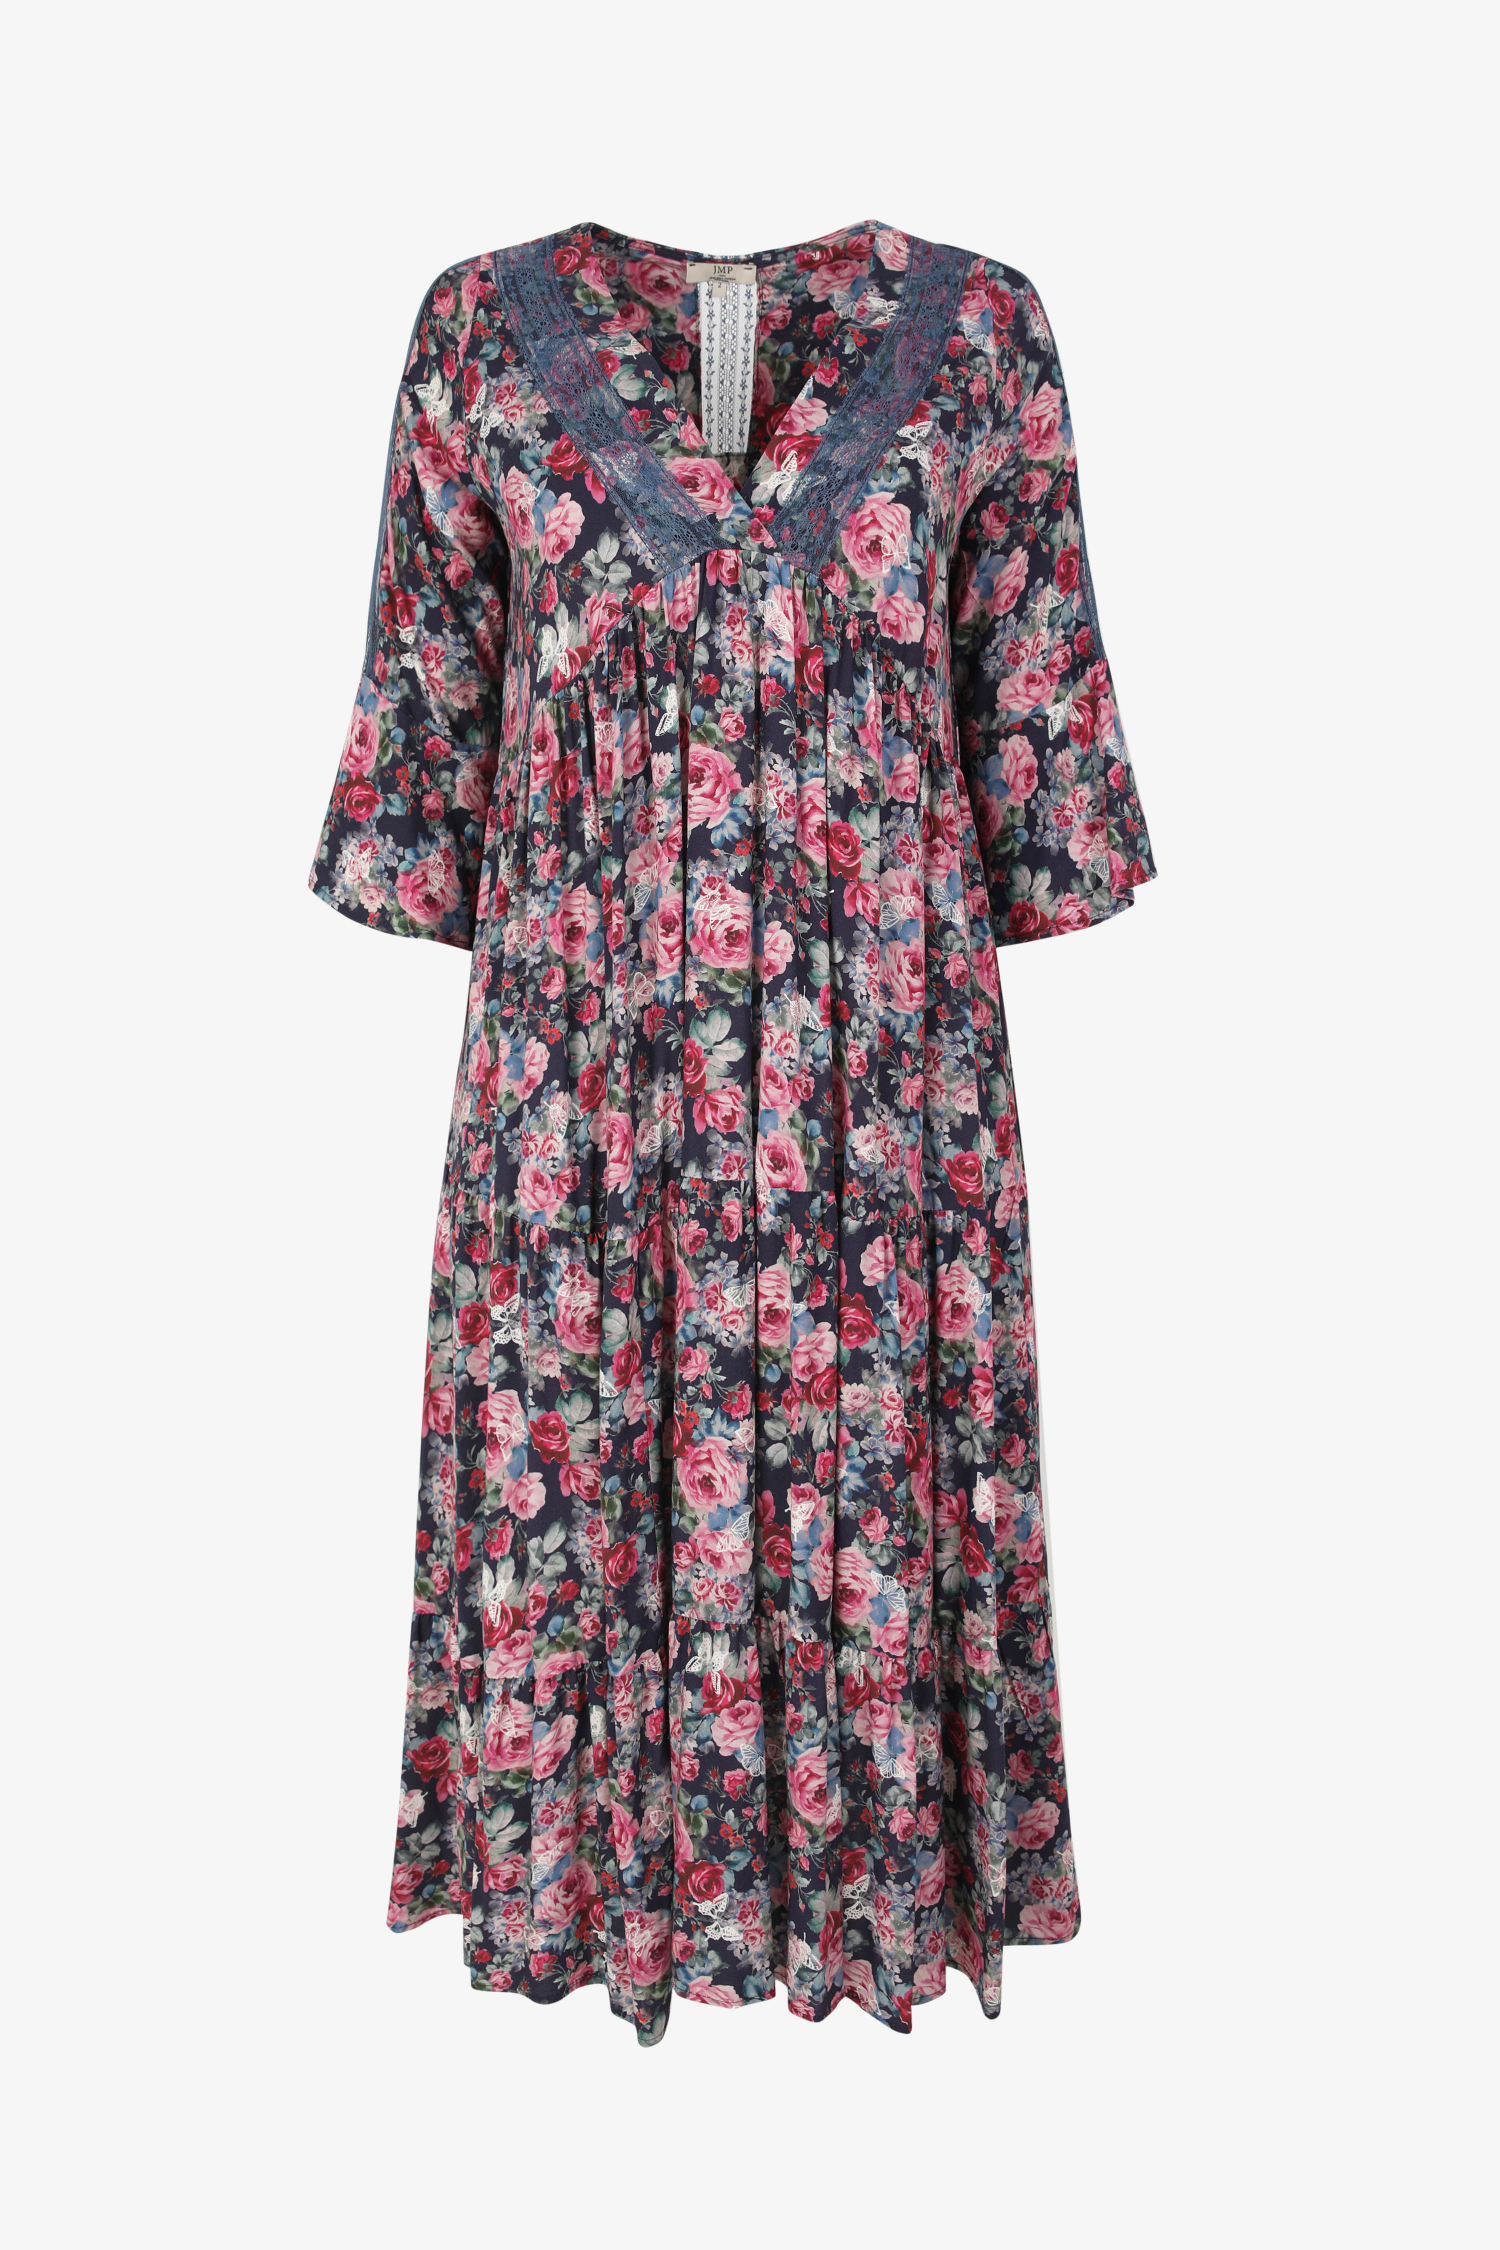 Bohemian-style floral print dress (shipping February 10/15)